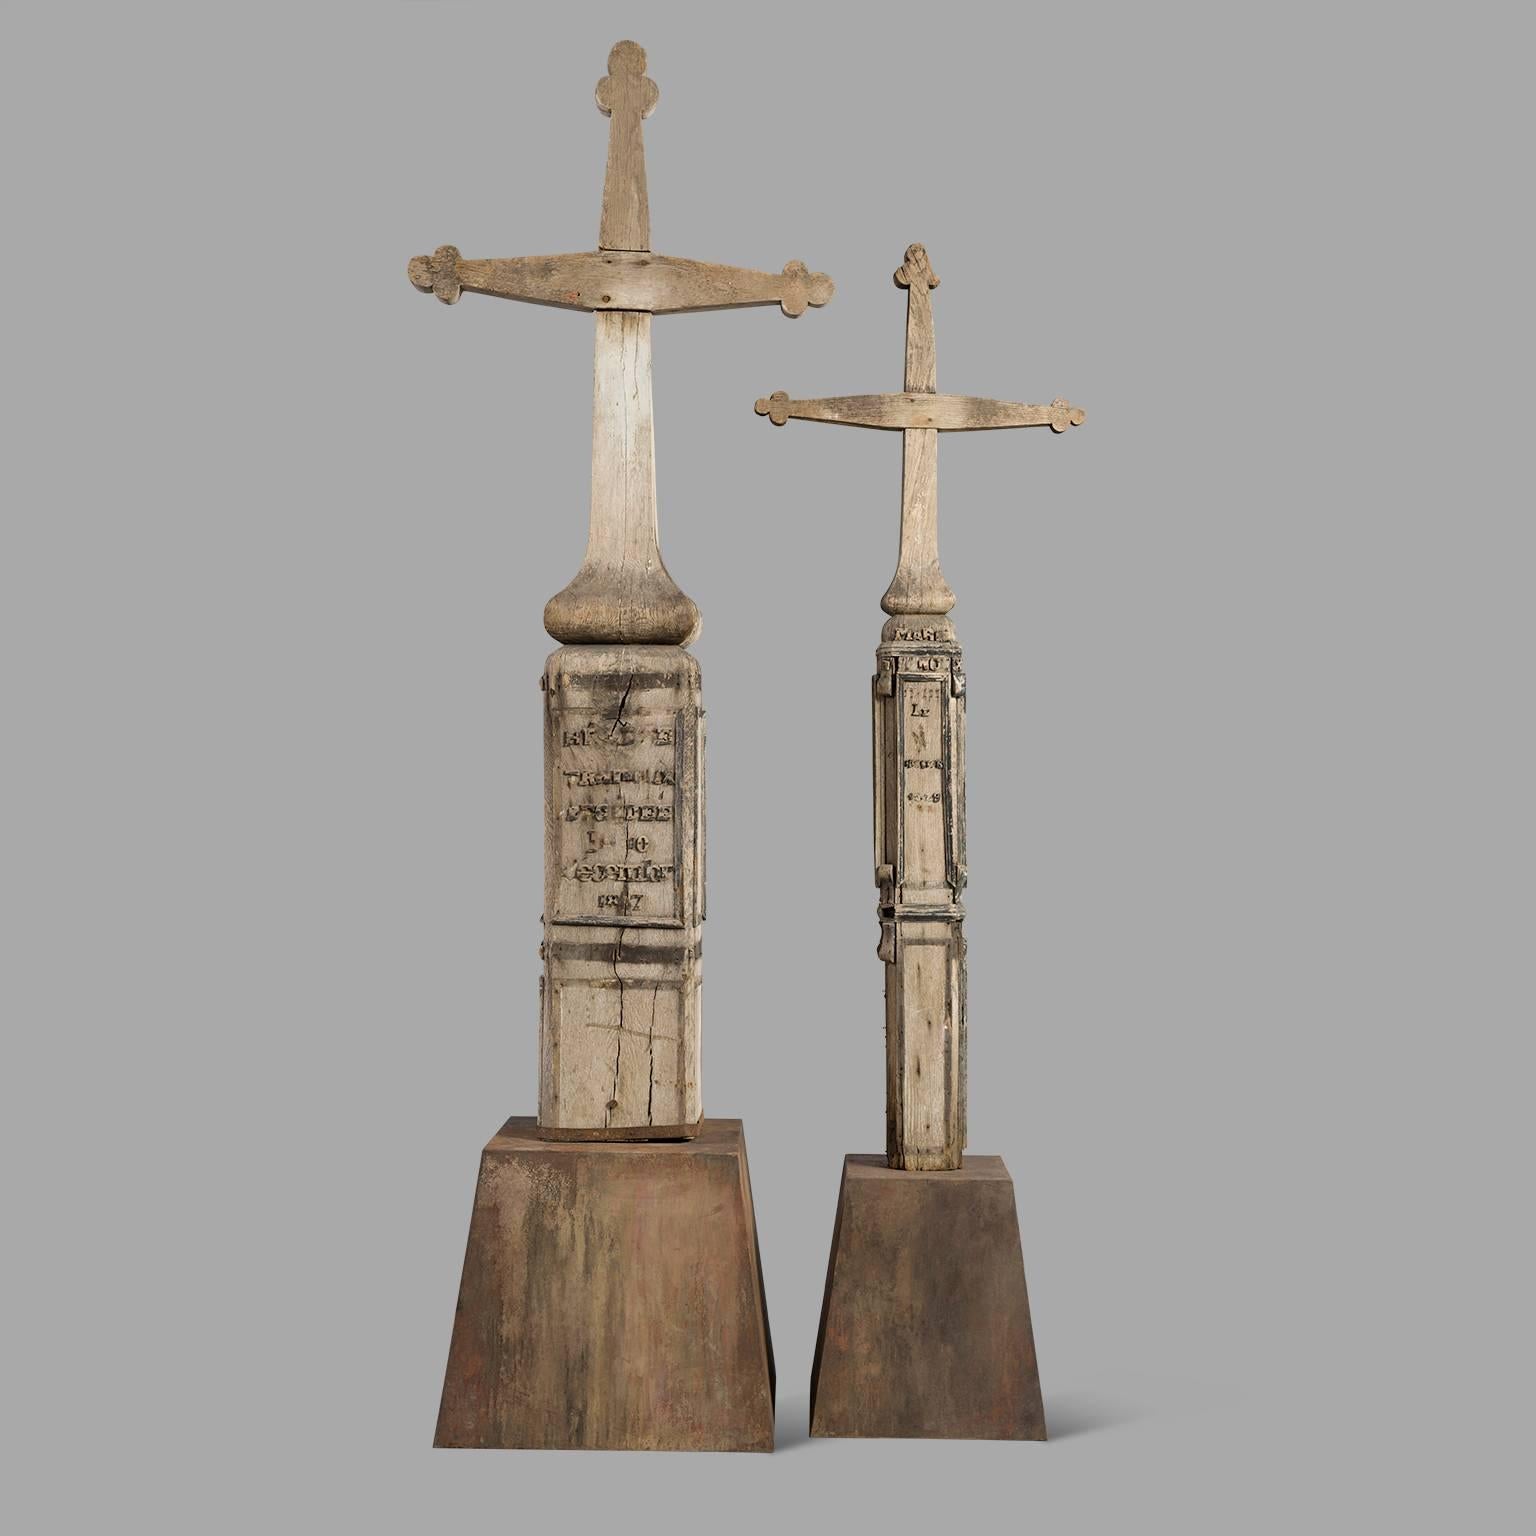 Both carved crosses are from the same family, probably two sisters. Despite the many flaws in their lettering, one can still read 'Marie 1889' and 'Helen, died on December 1887 10th'.
They are mounted on a contemporary base preserving their